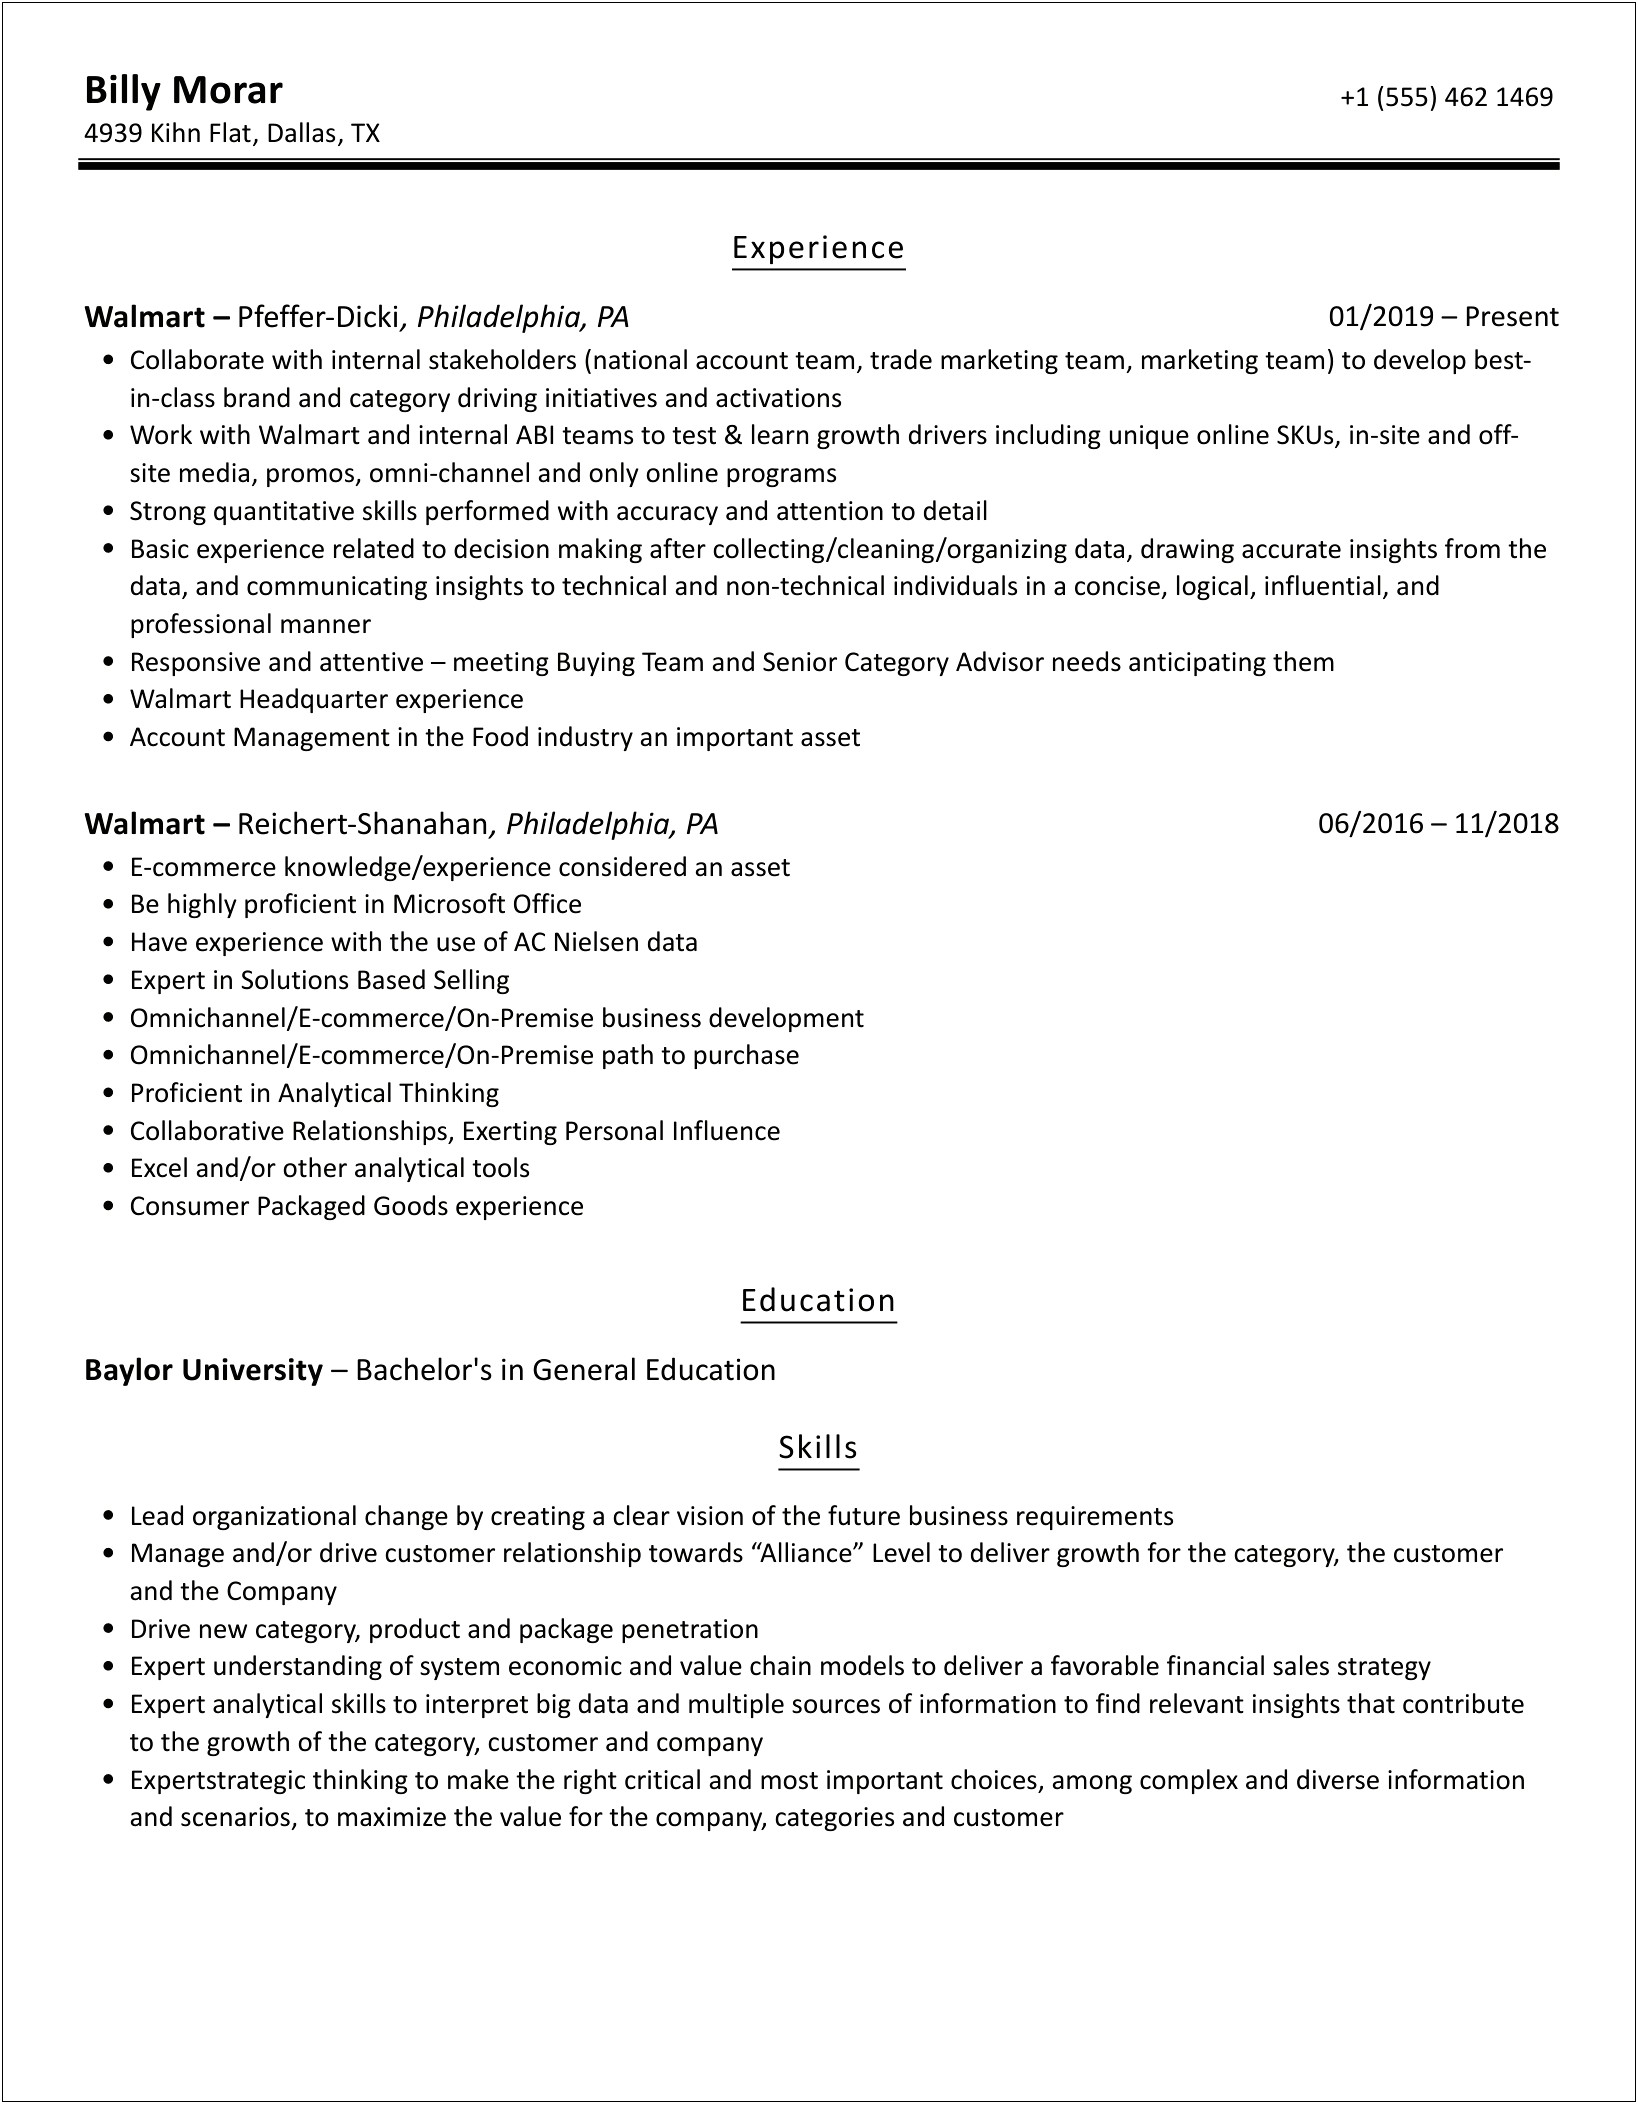 Customer Service Resume Examples For Walmart